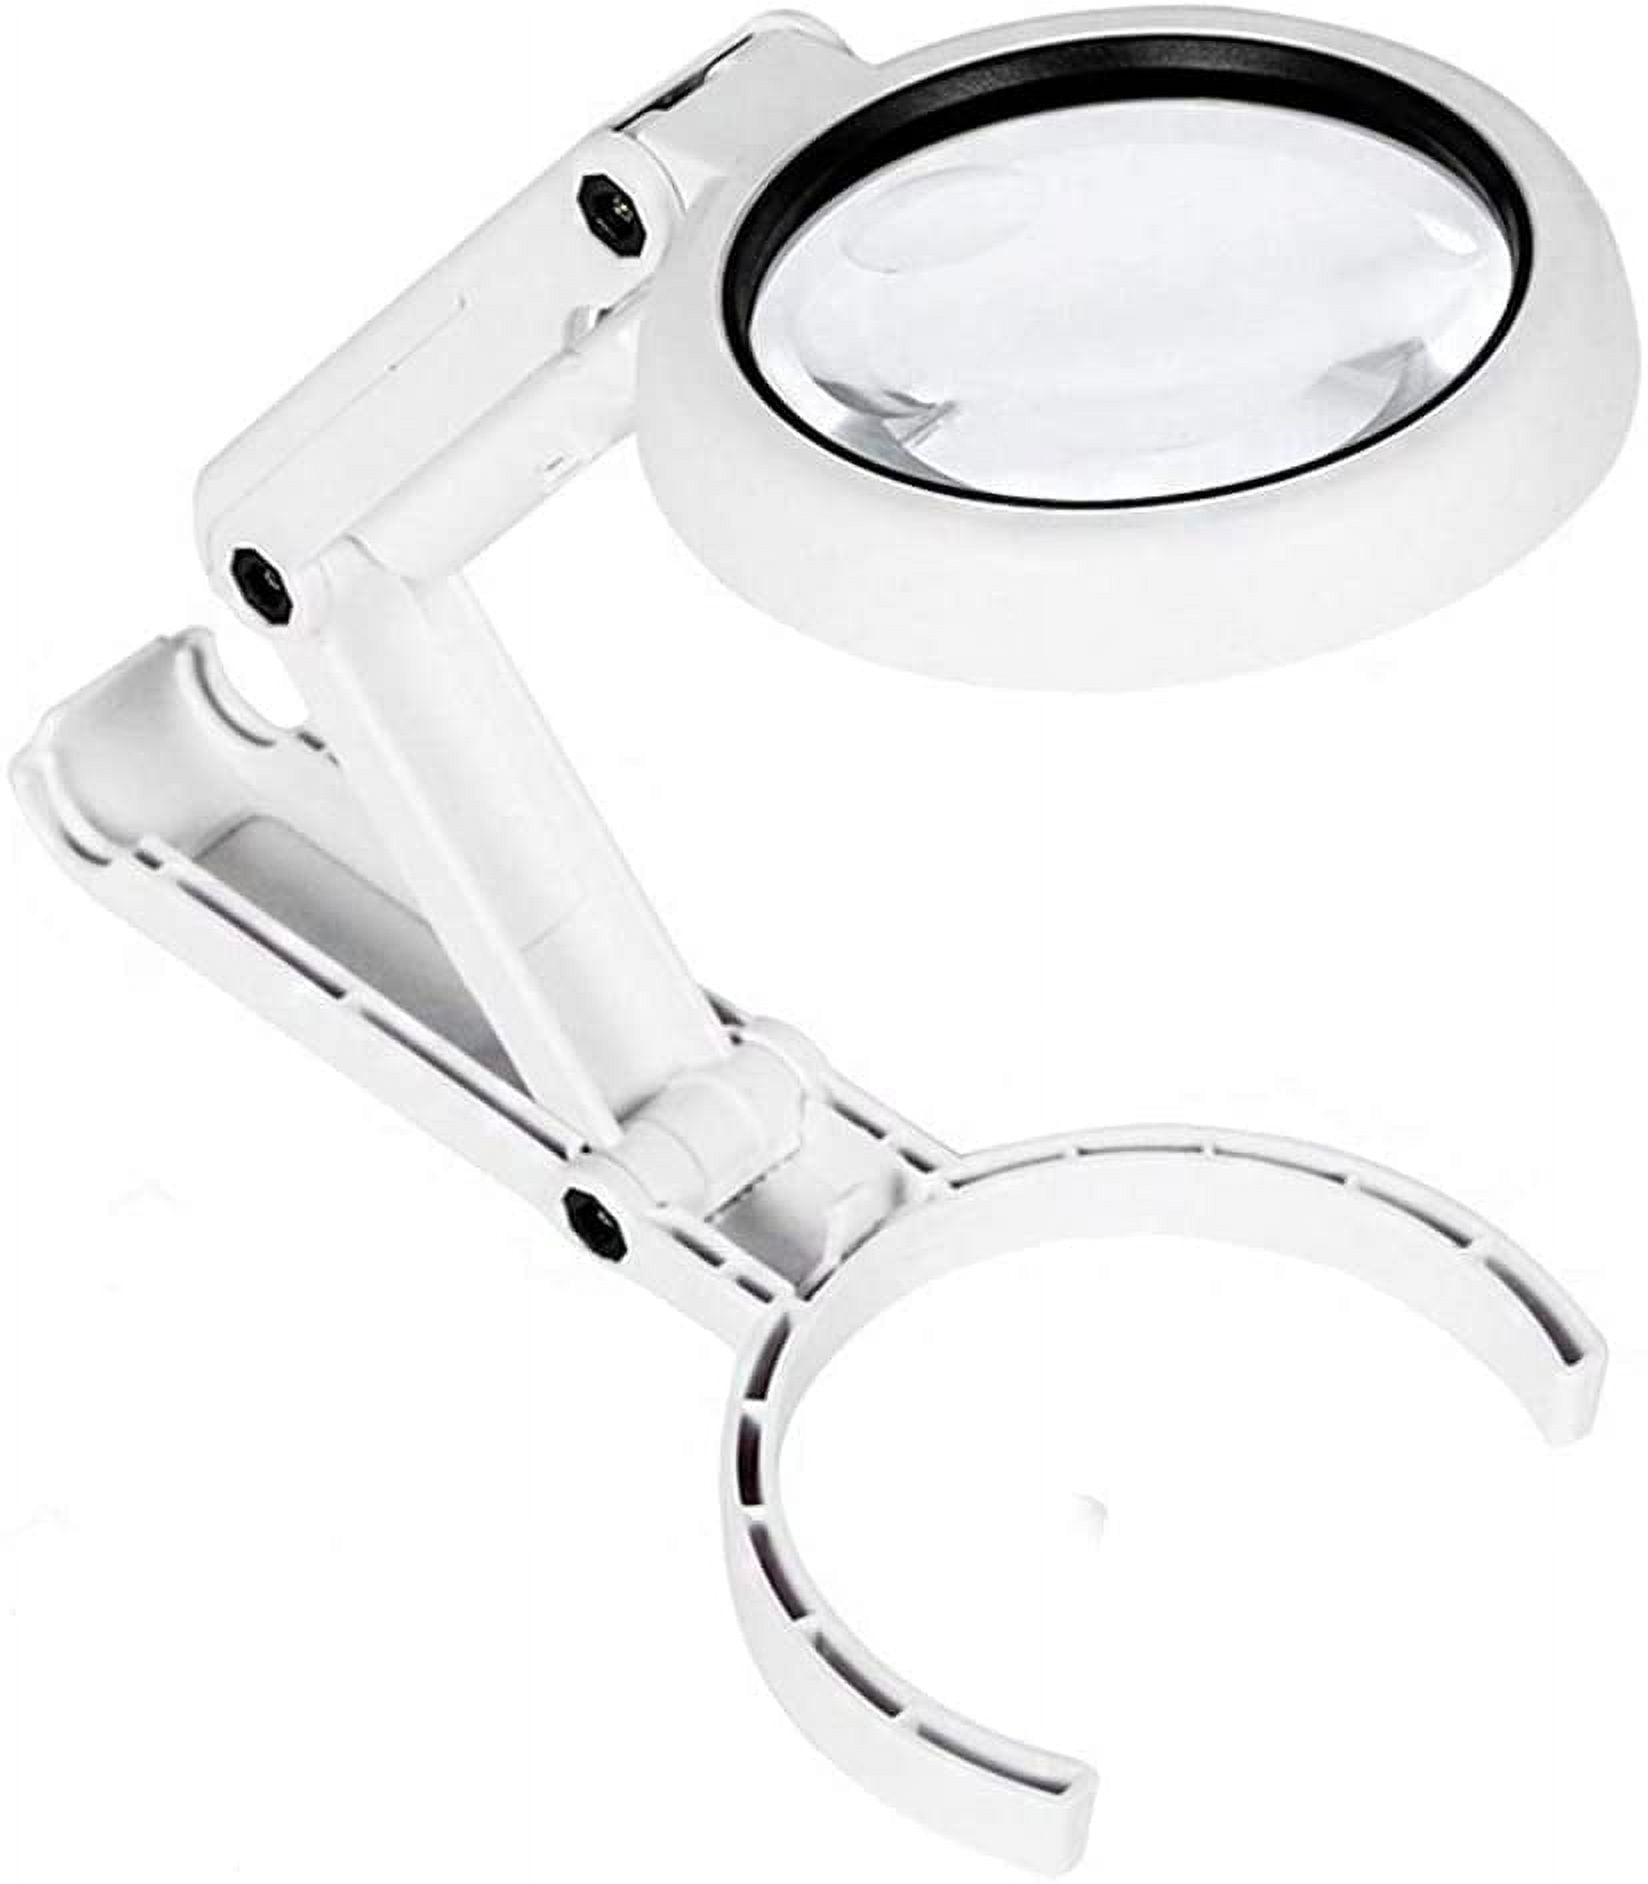 5X Rechargeable Magnifying Glass with Light and Stand, KACIOPOO Lighted Magnifying Glass Hands Free for Reading, Seniors, Hobbies, Craft